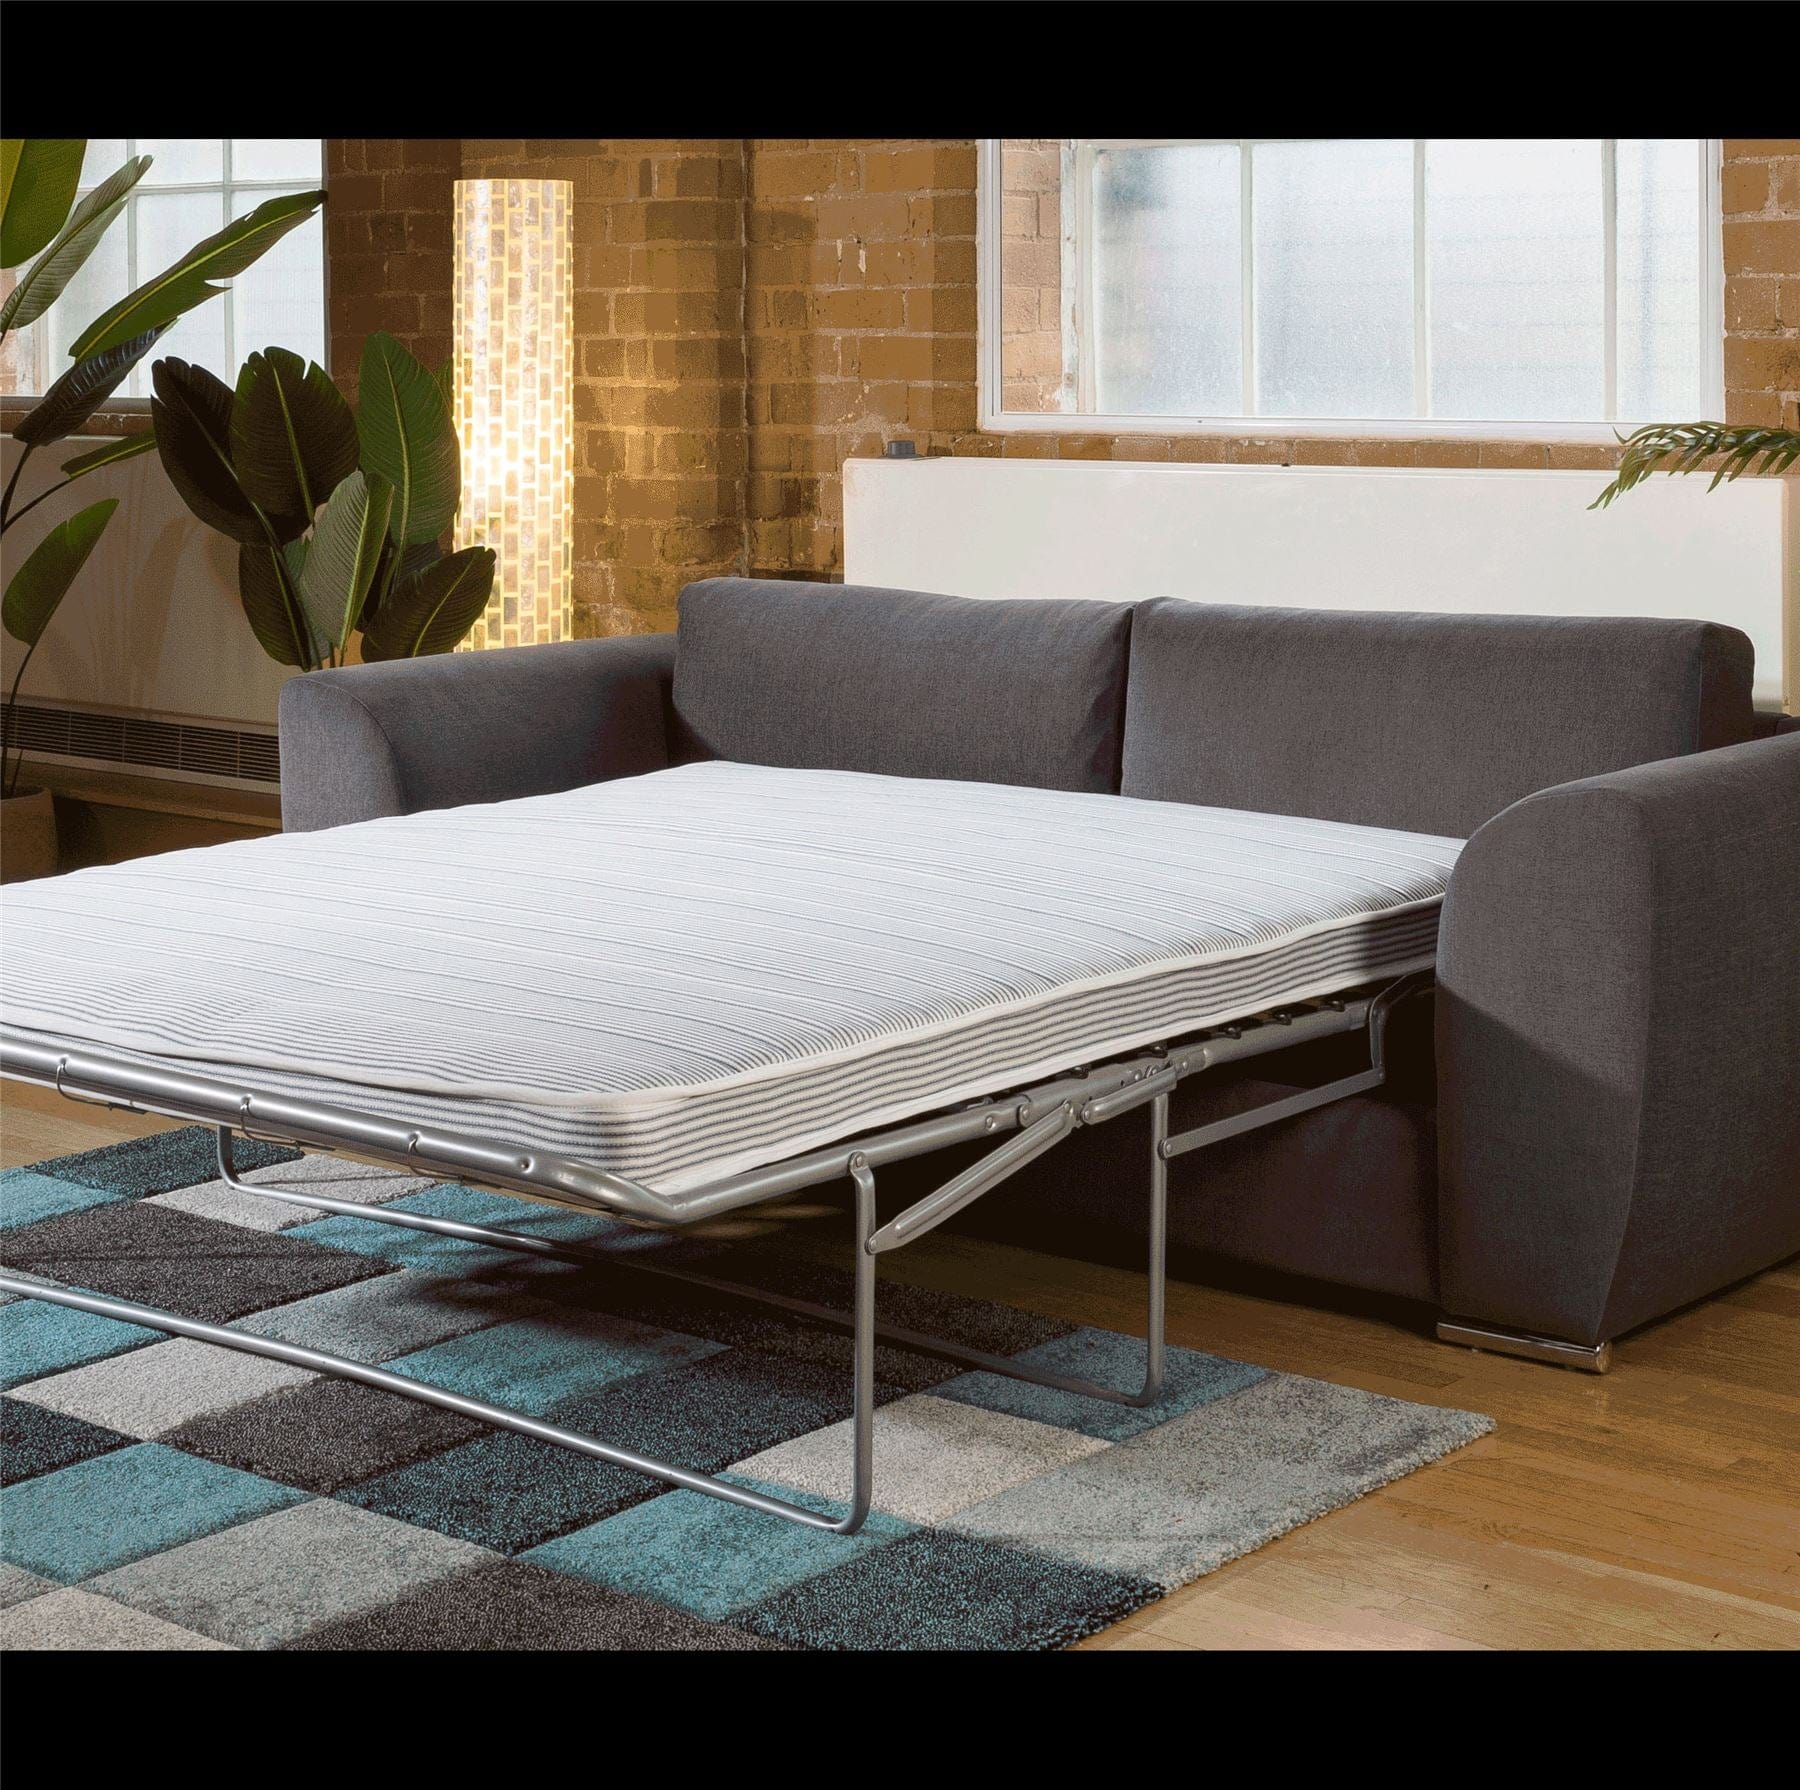 Quatropi Quatropi Modern Large 2400mm wide 3 Seater Settee / Sofabed with arms